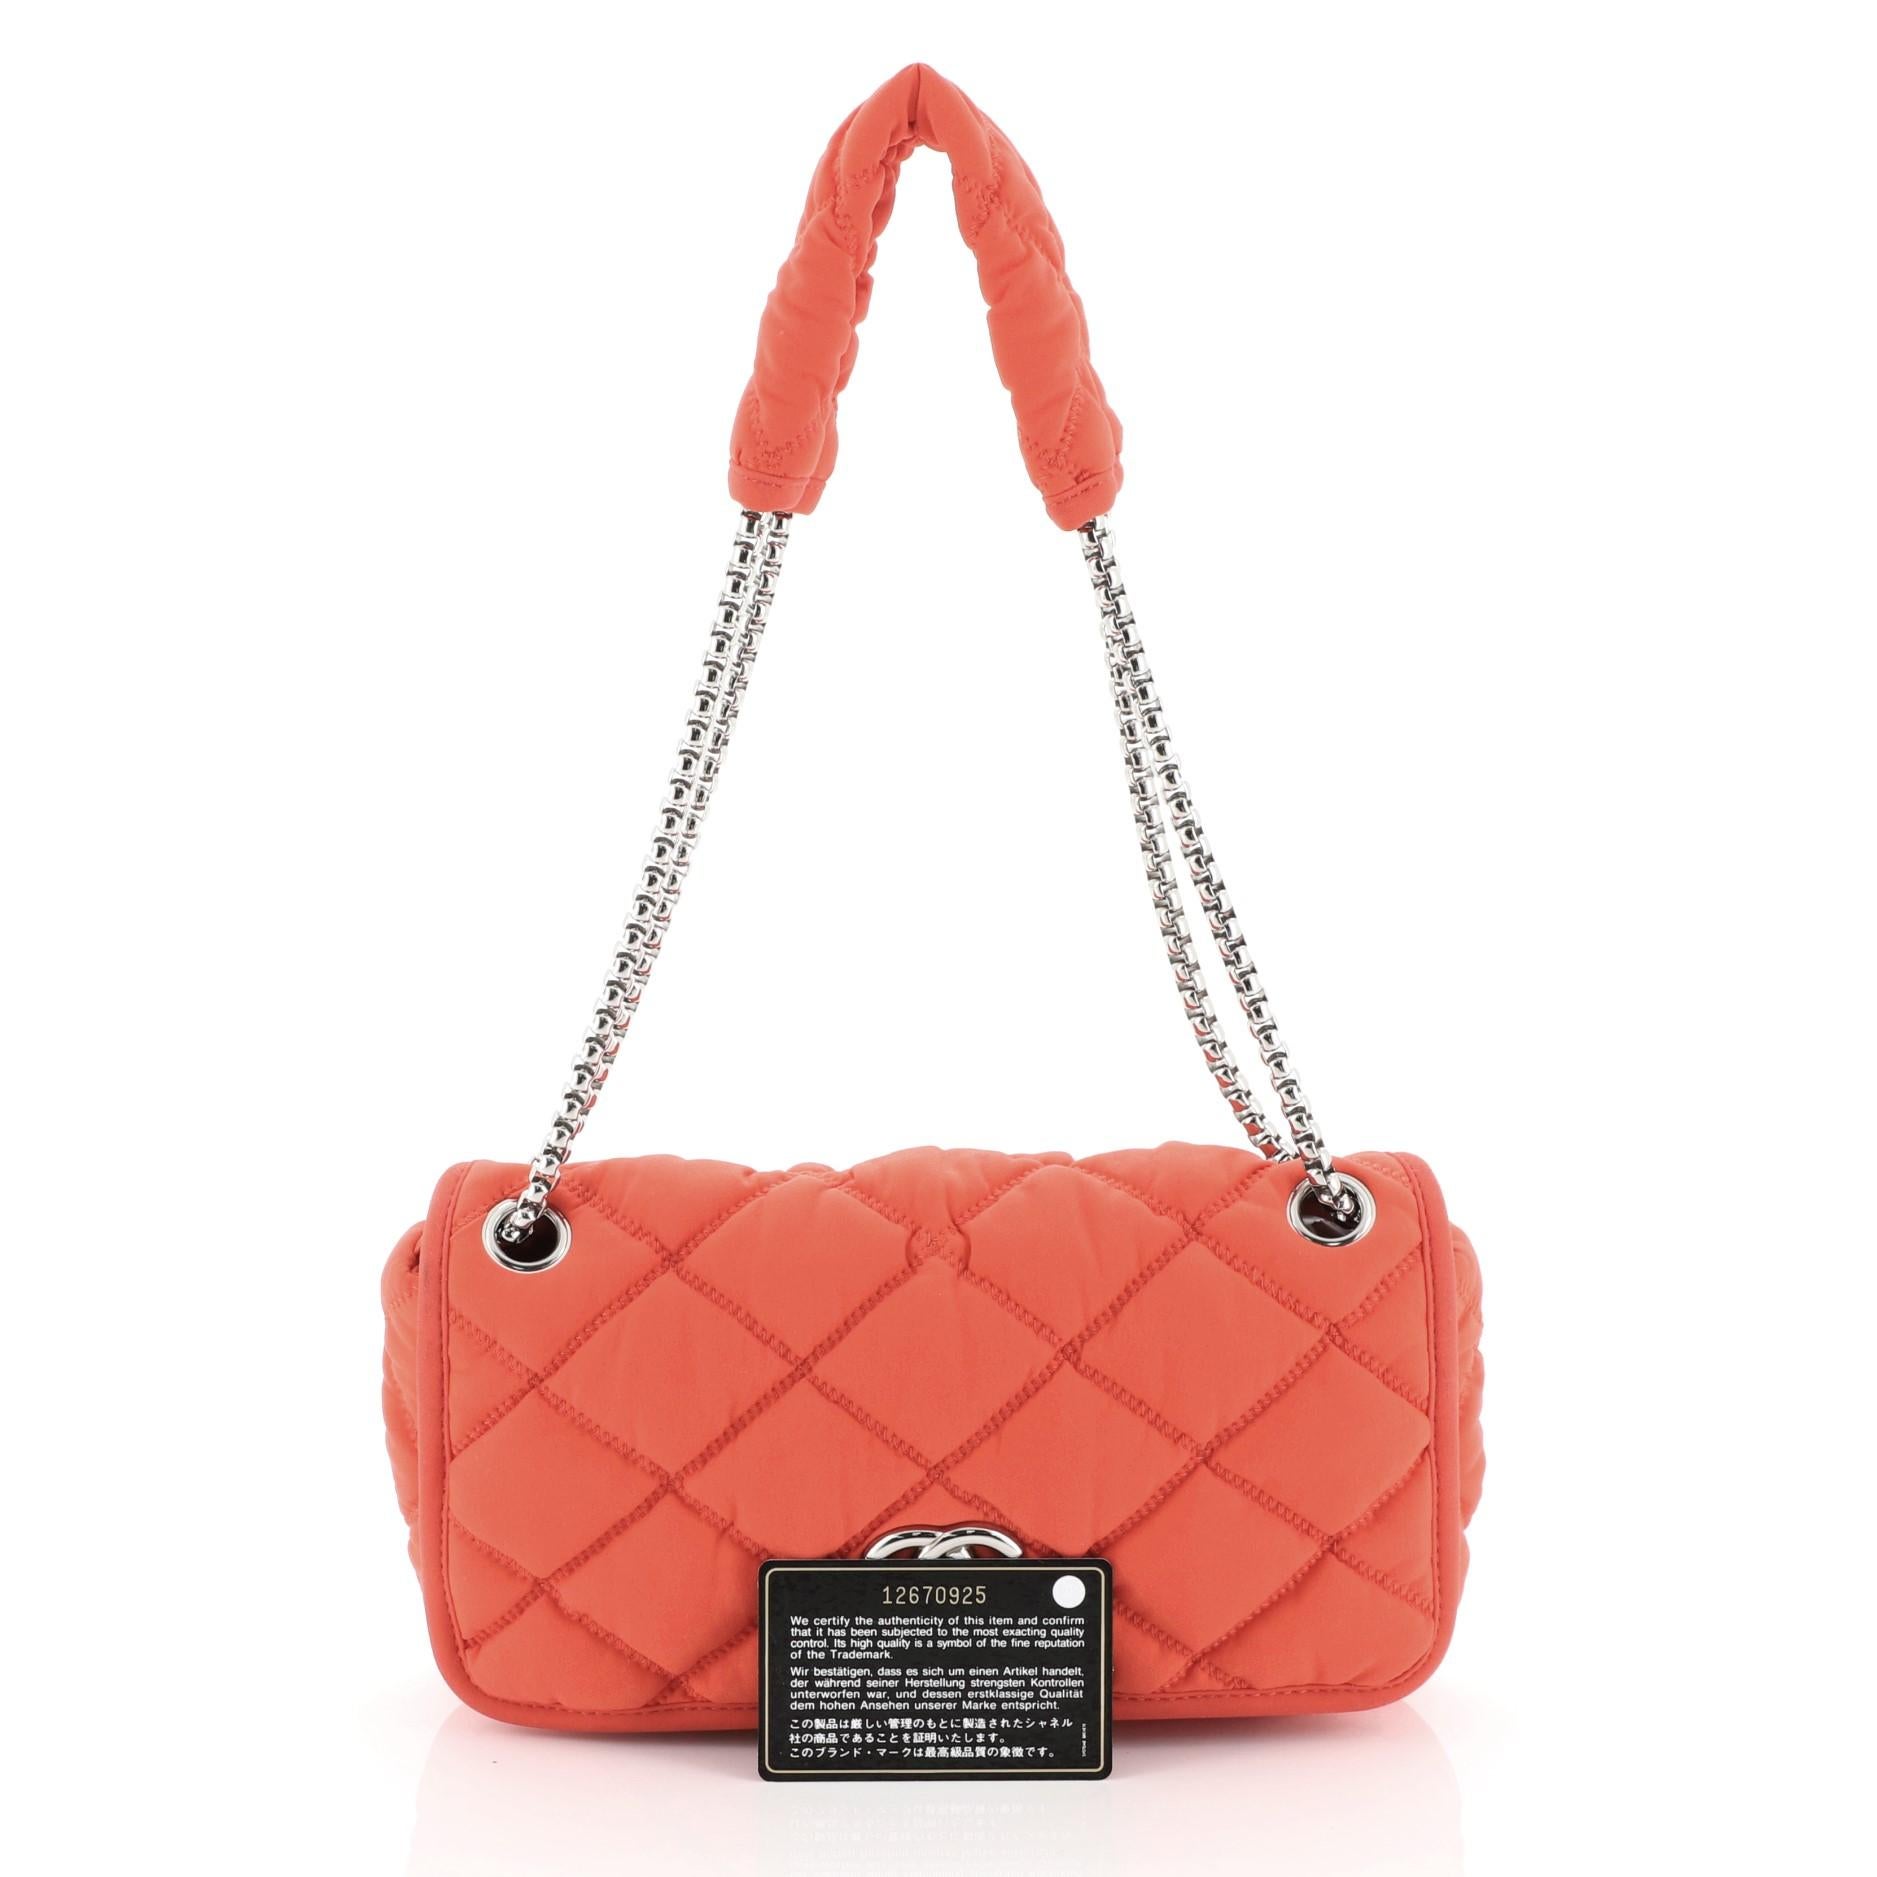 This Chanel Bubble Flap Bag Quilted Nylon Medium, crafted in red quilted nylon, features a woven-in nylon chain link strap, Chanel's CC logo at the front and silver-tone hardware. Its flap opens to a gray satin interior with side zip pocket.